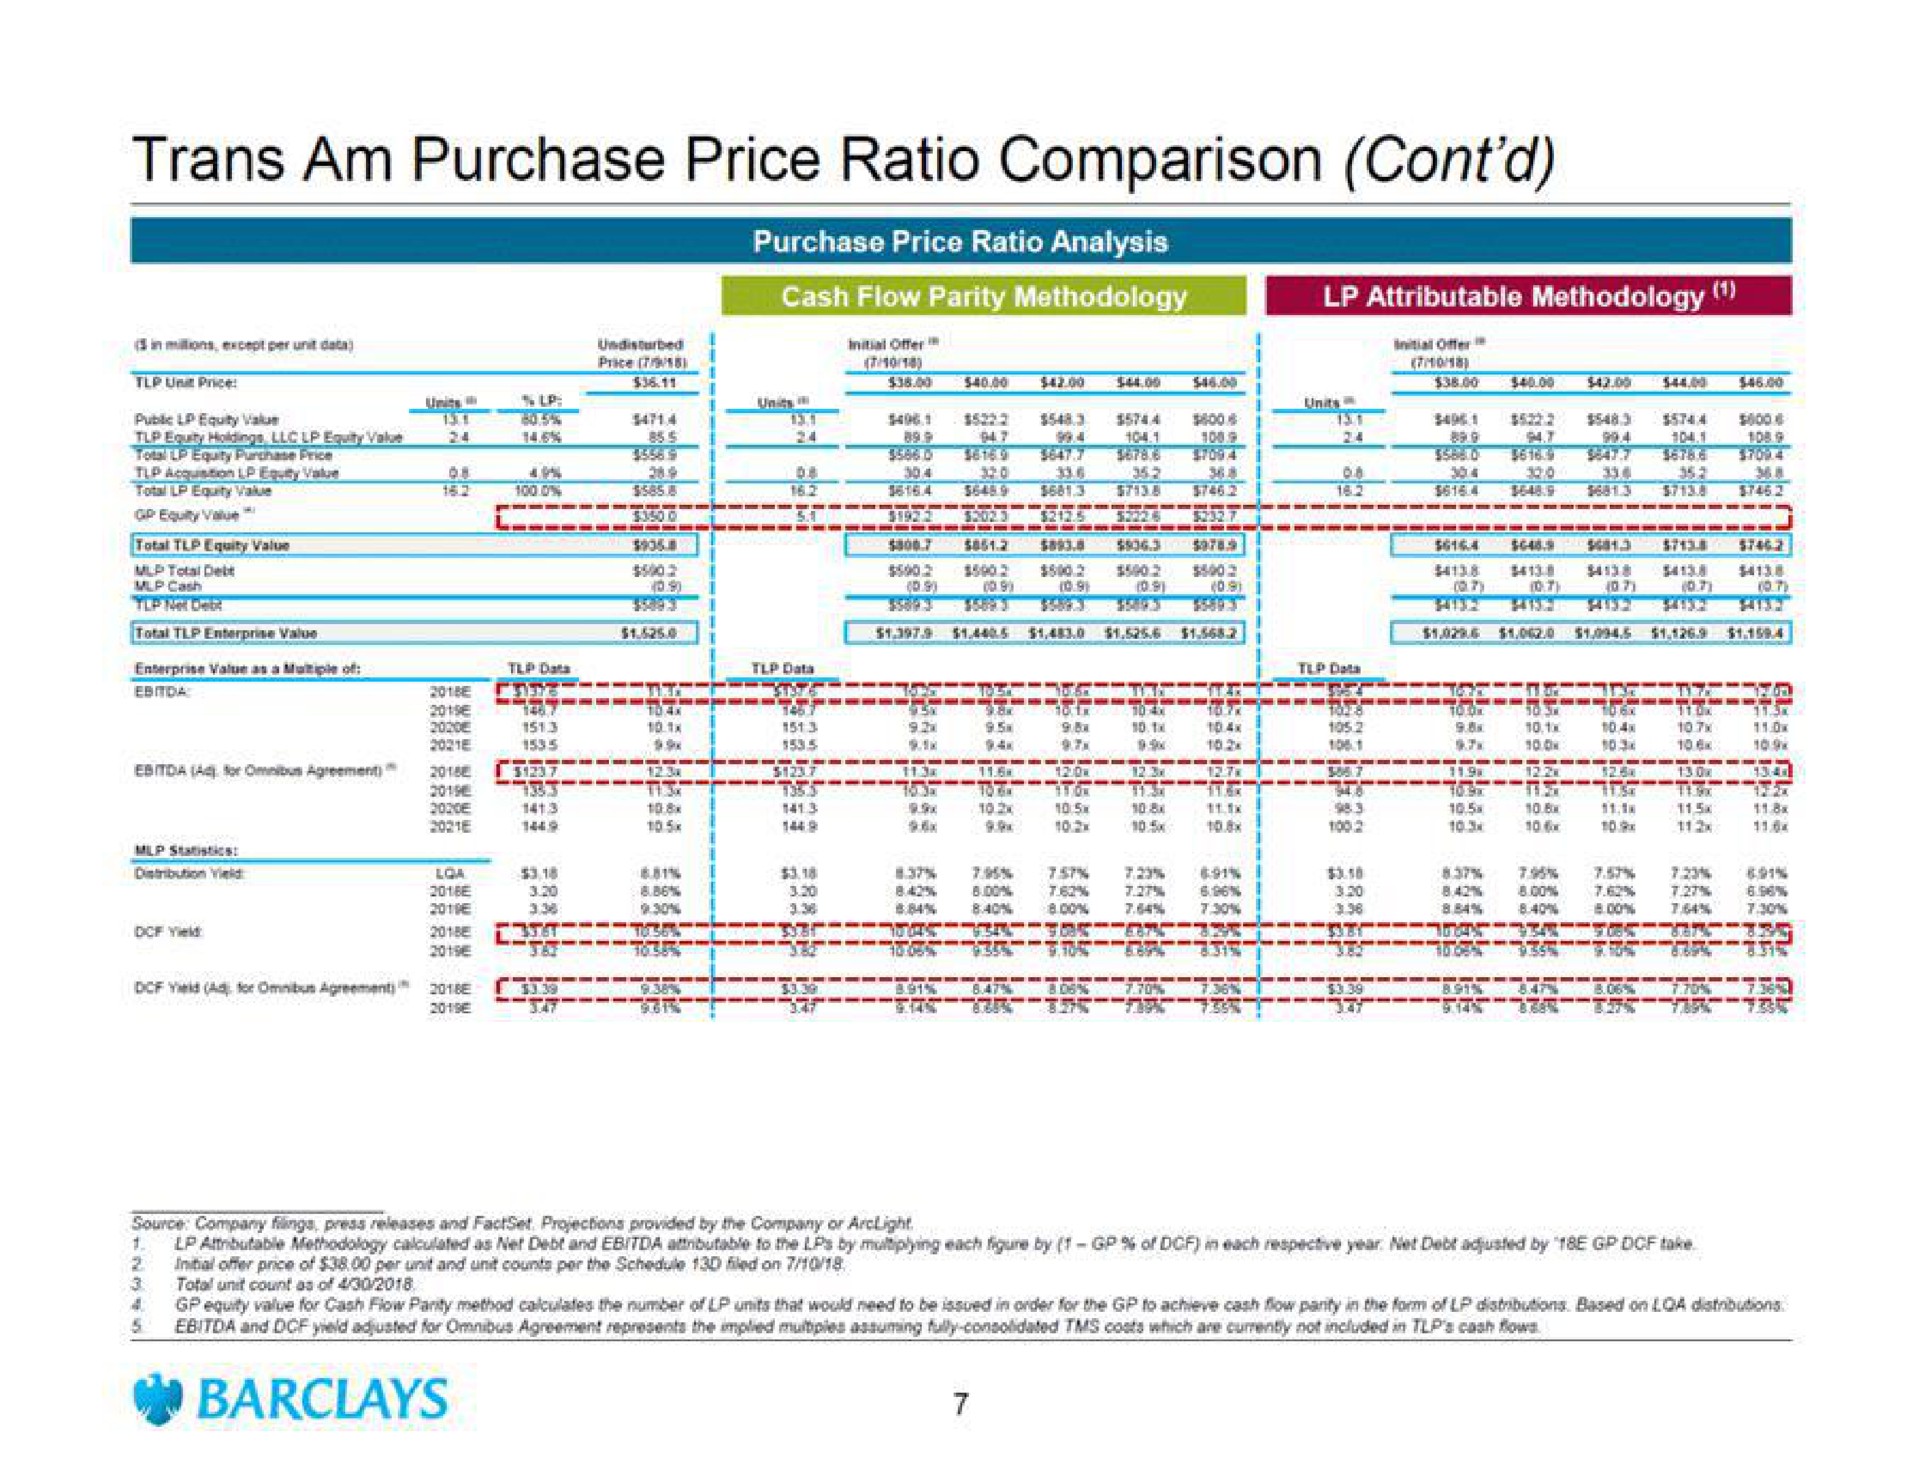 am purchase price ratio comparison melted cash flow parity methodology methodology | Barclays